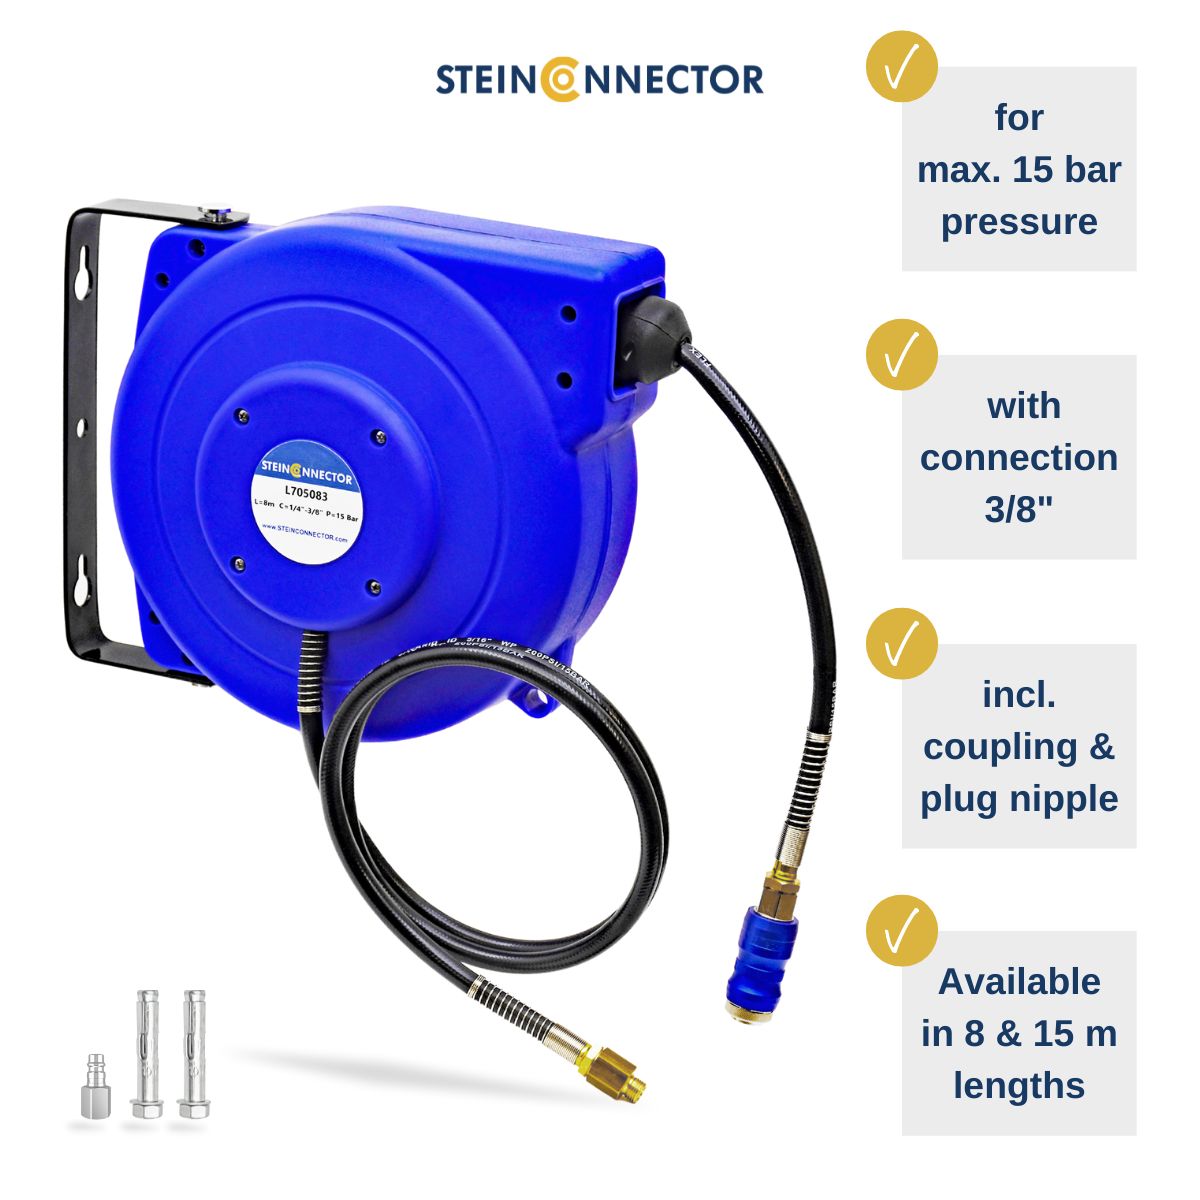 Steinconnector professional hose reel blue in 8 and 15 m hose length - automatic hose reel with wall bracket incl. mounting material